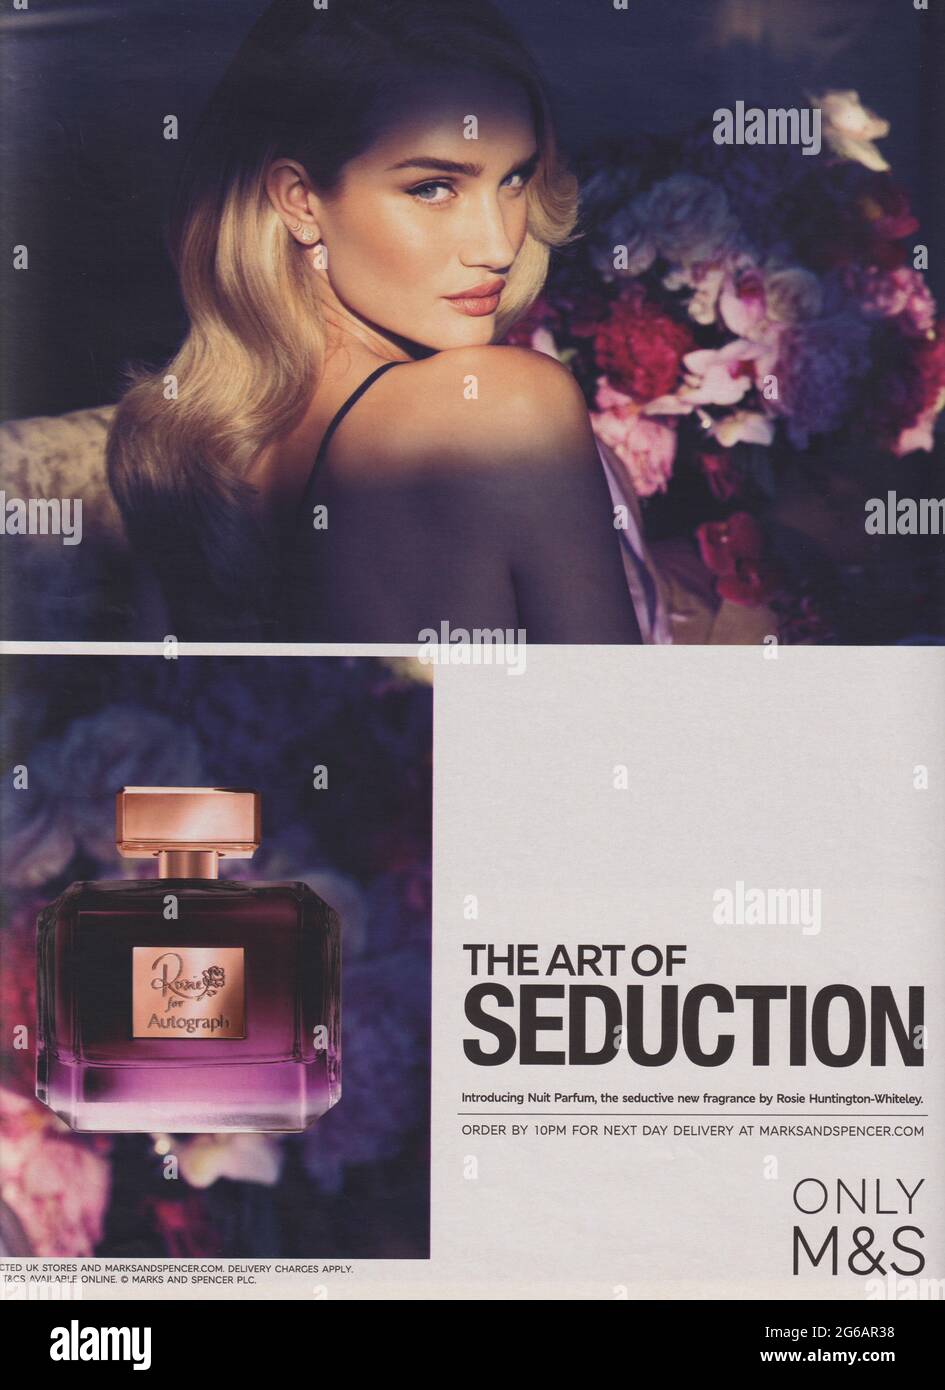 poster advertising M&S The Art of Seduction fragrance with Rosie Huntington-Whiteley, paper magazine from 2015, creative Marks & Spencer 2010s advert Stock Photo